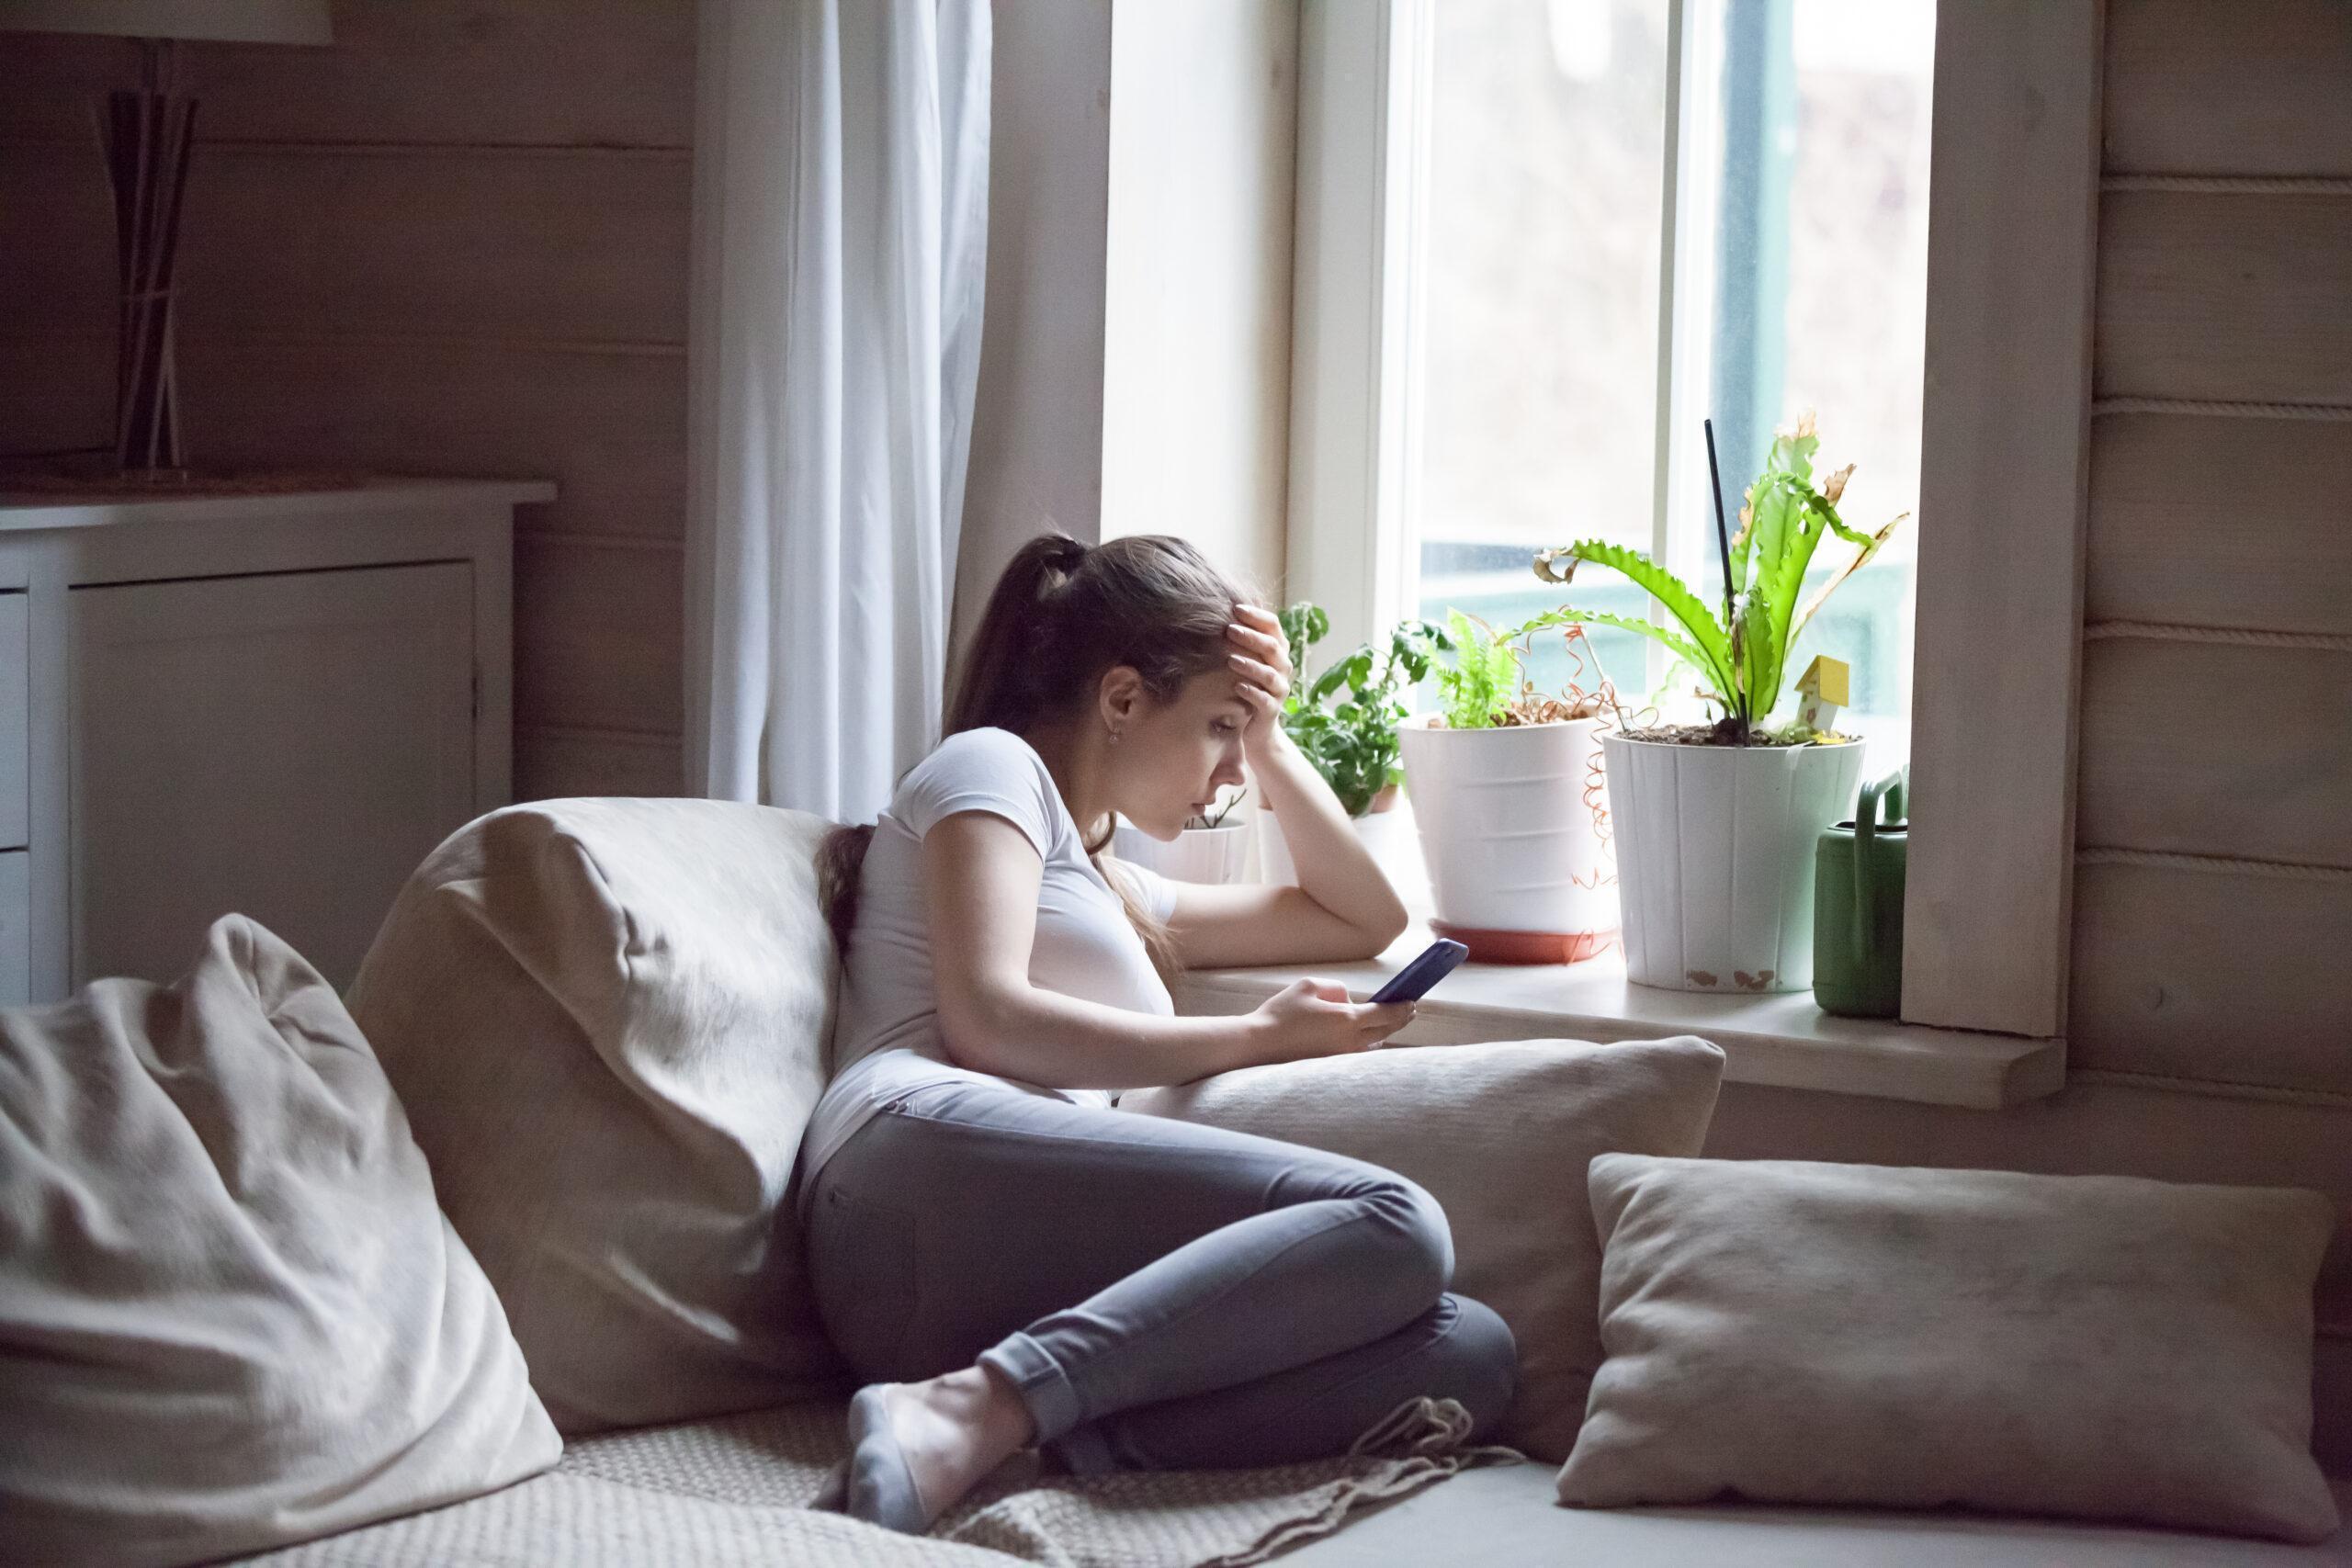 Woman upset after reading bad message on phone at home. Frustrated sad female crying, suffering, not in mood, thinking, depressed, stressed sitting on comfortable sofa near window holding smartphone